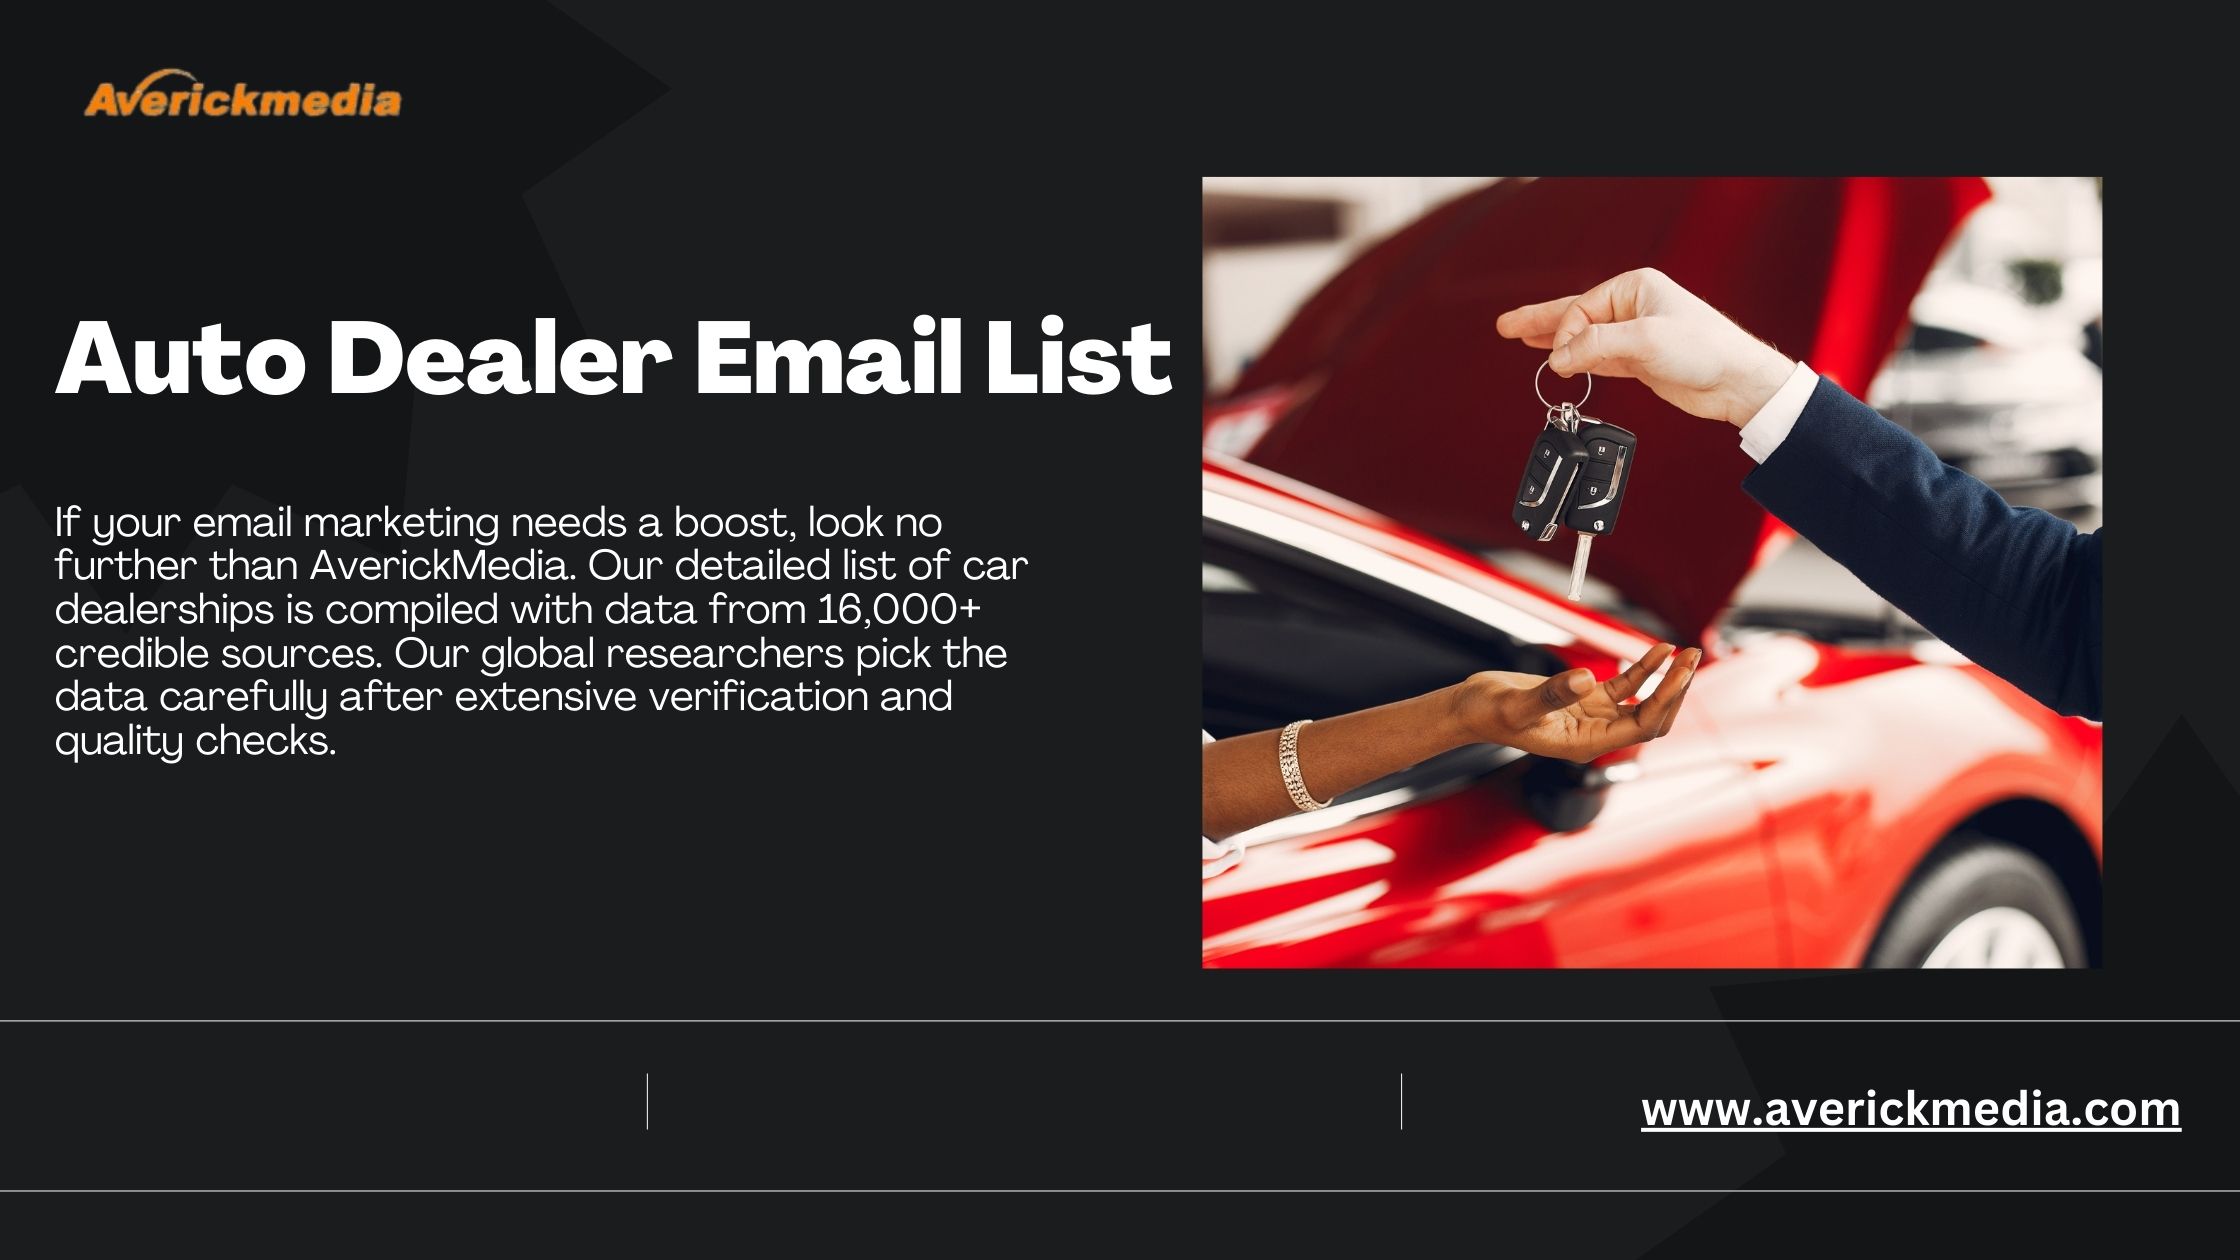 Auto Dealers Email List - 100% verified data